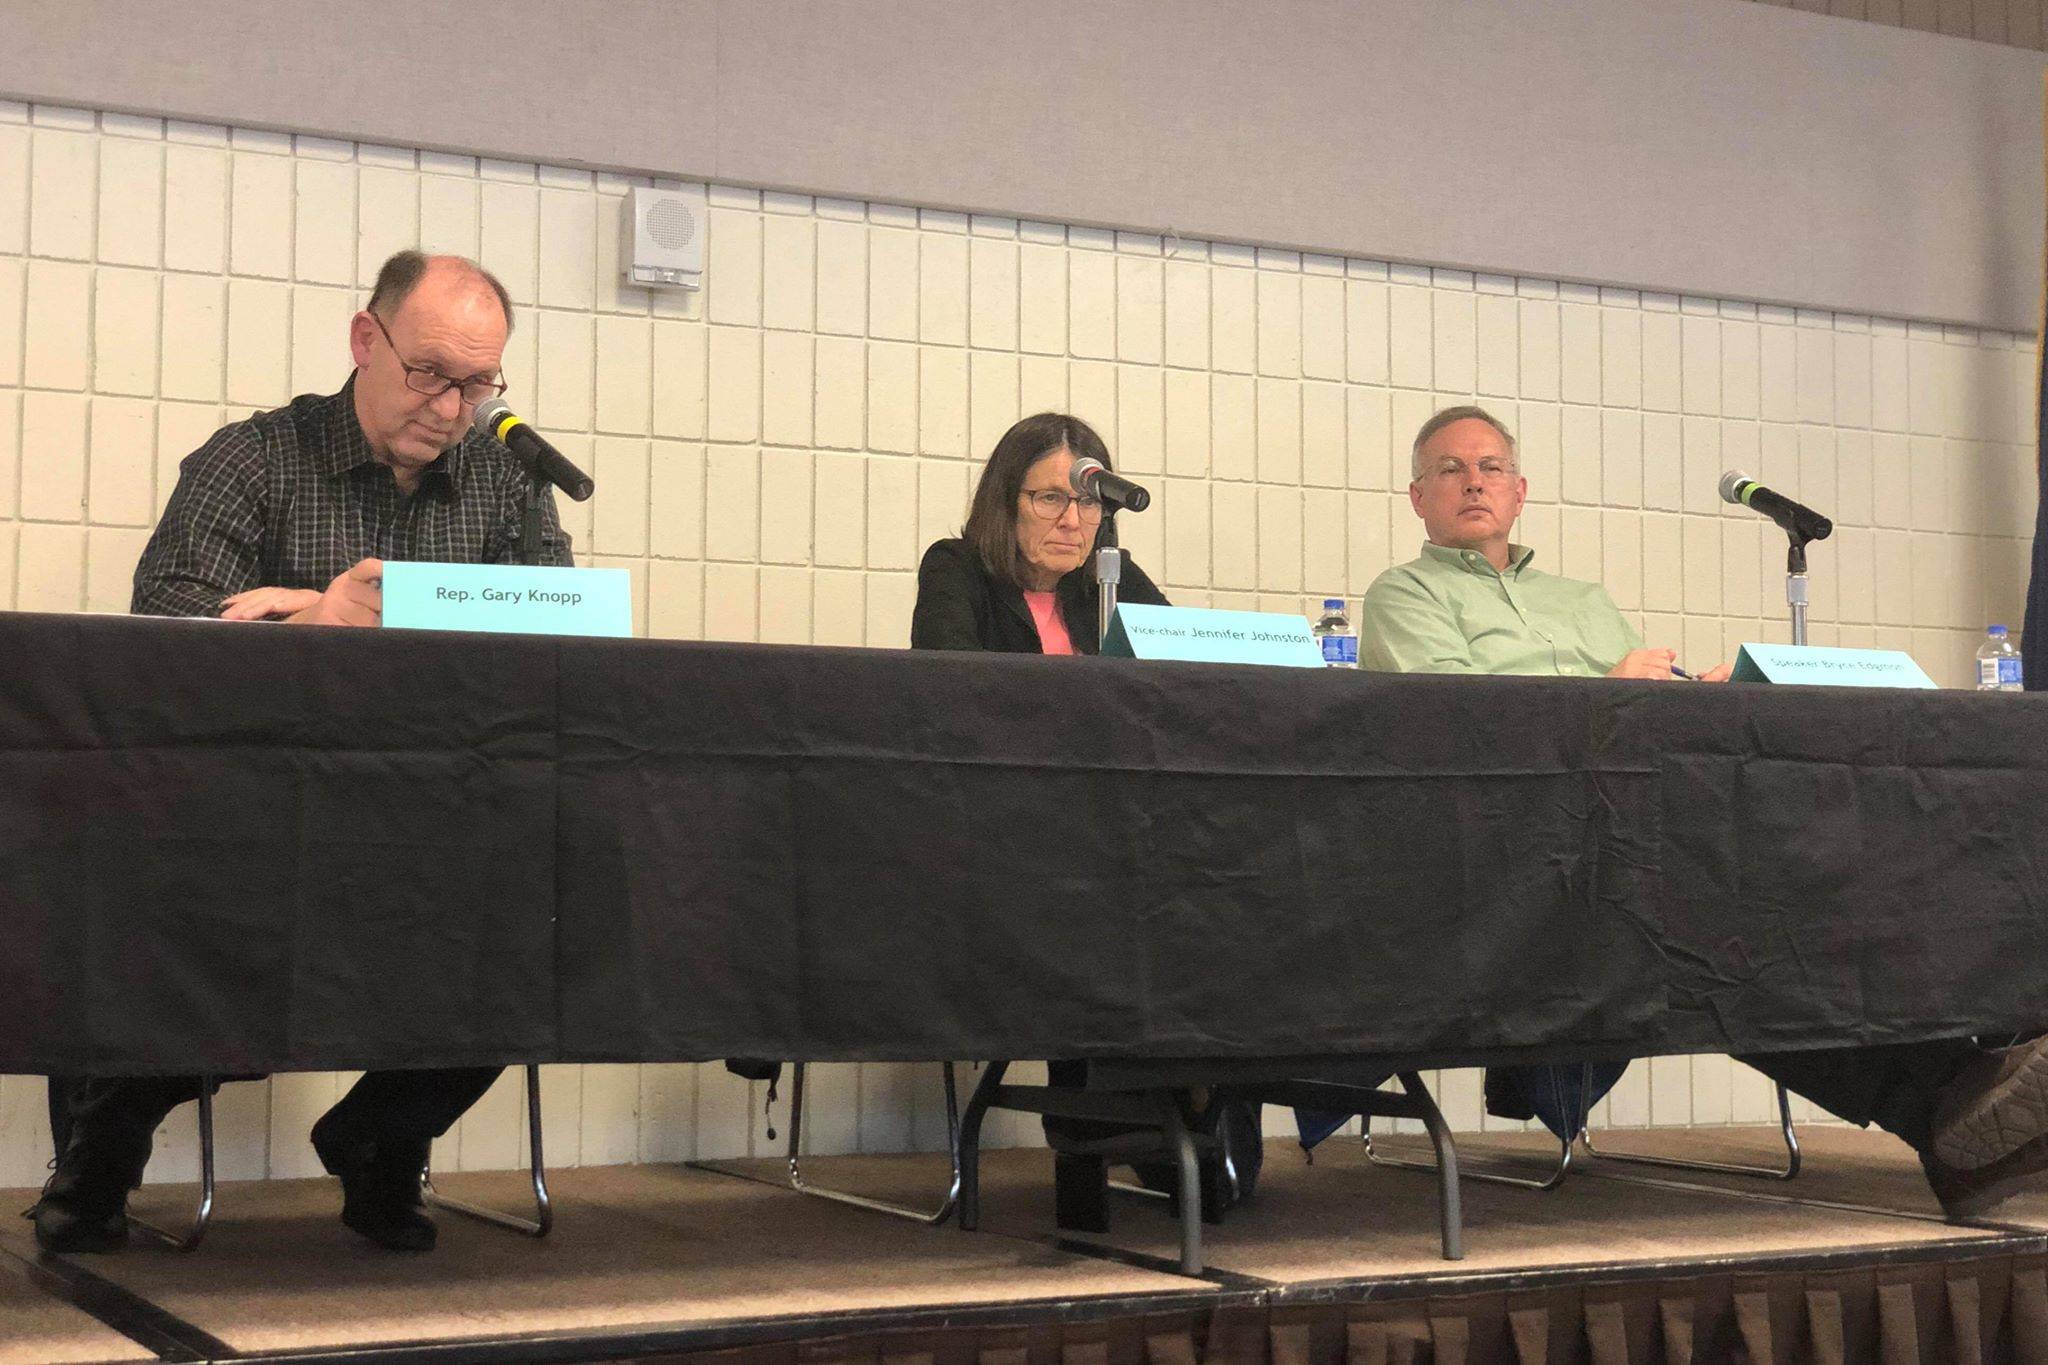 Rep. Gary Knopp (R-Kenai/Soldotna), House Speaker Bryce Edgmon (I-Dillingham) and Vice-Chair of the House Finance Committee Janice Johnston (R-Anchorage) listen to public testimony at a local House Finance Committee meeting at the Soldotna Sports Complex on Saturday, March 23, 2019, in Soldotna, Alaska. (Photo by Victoria Petersen/Peninsula Clarion)